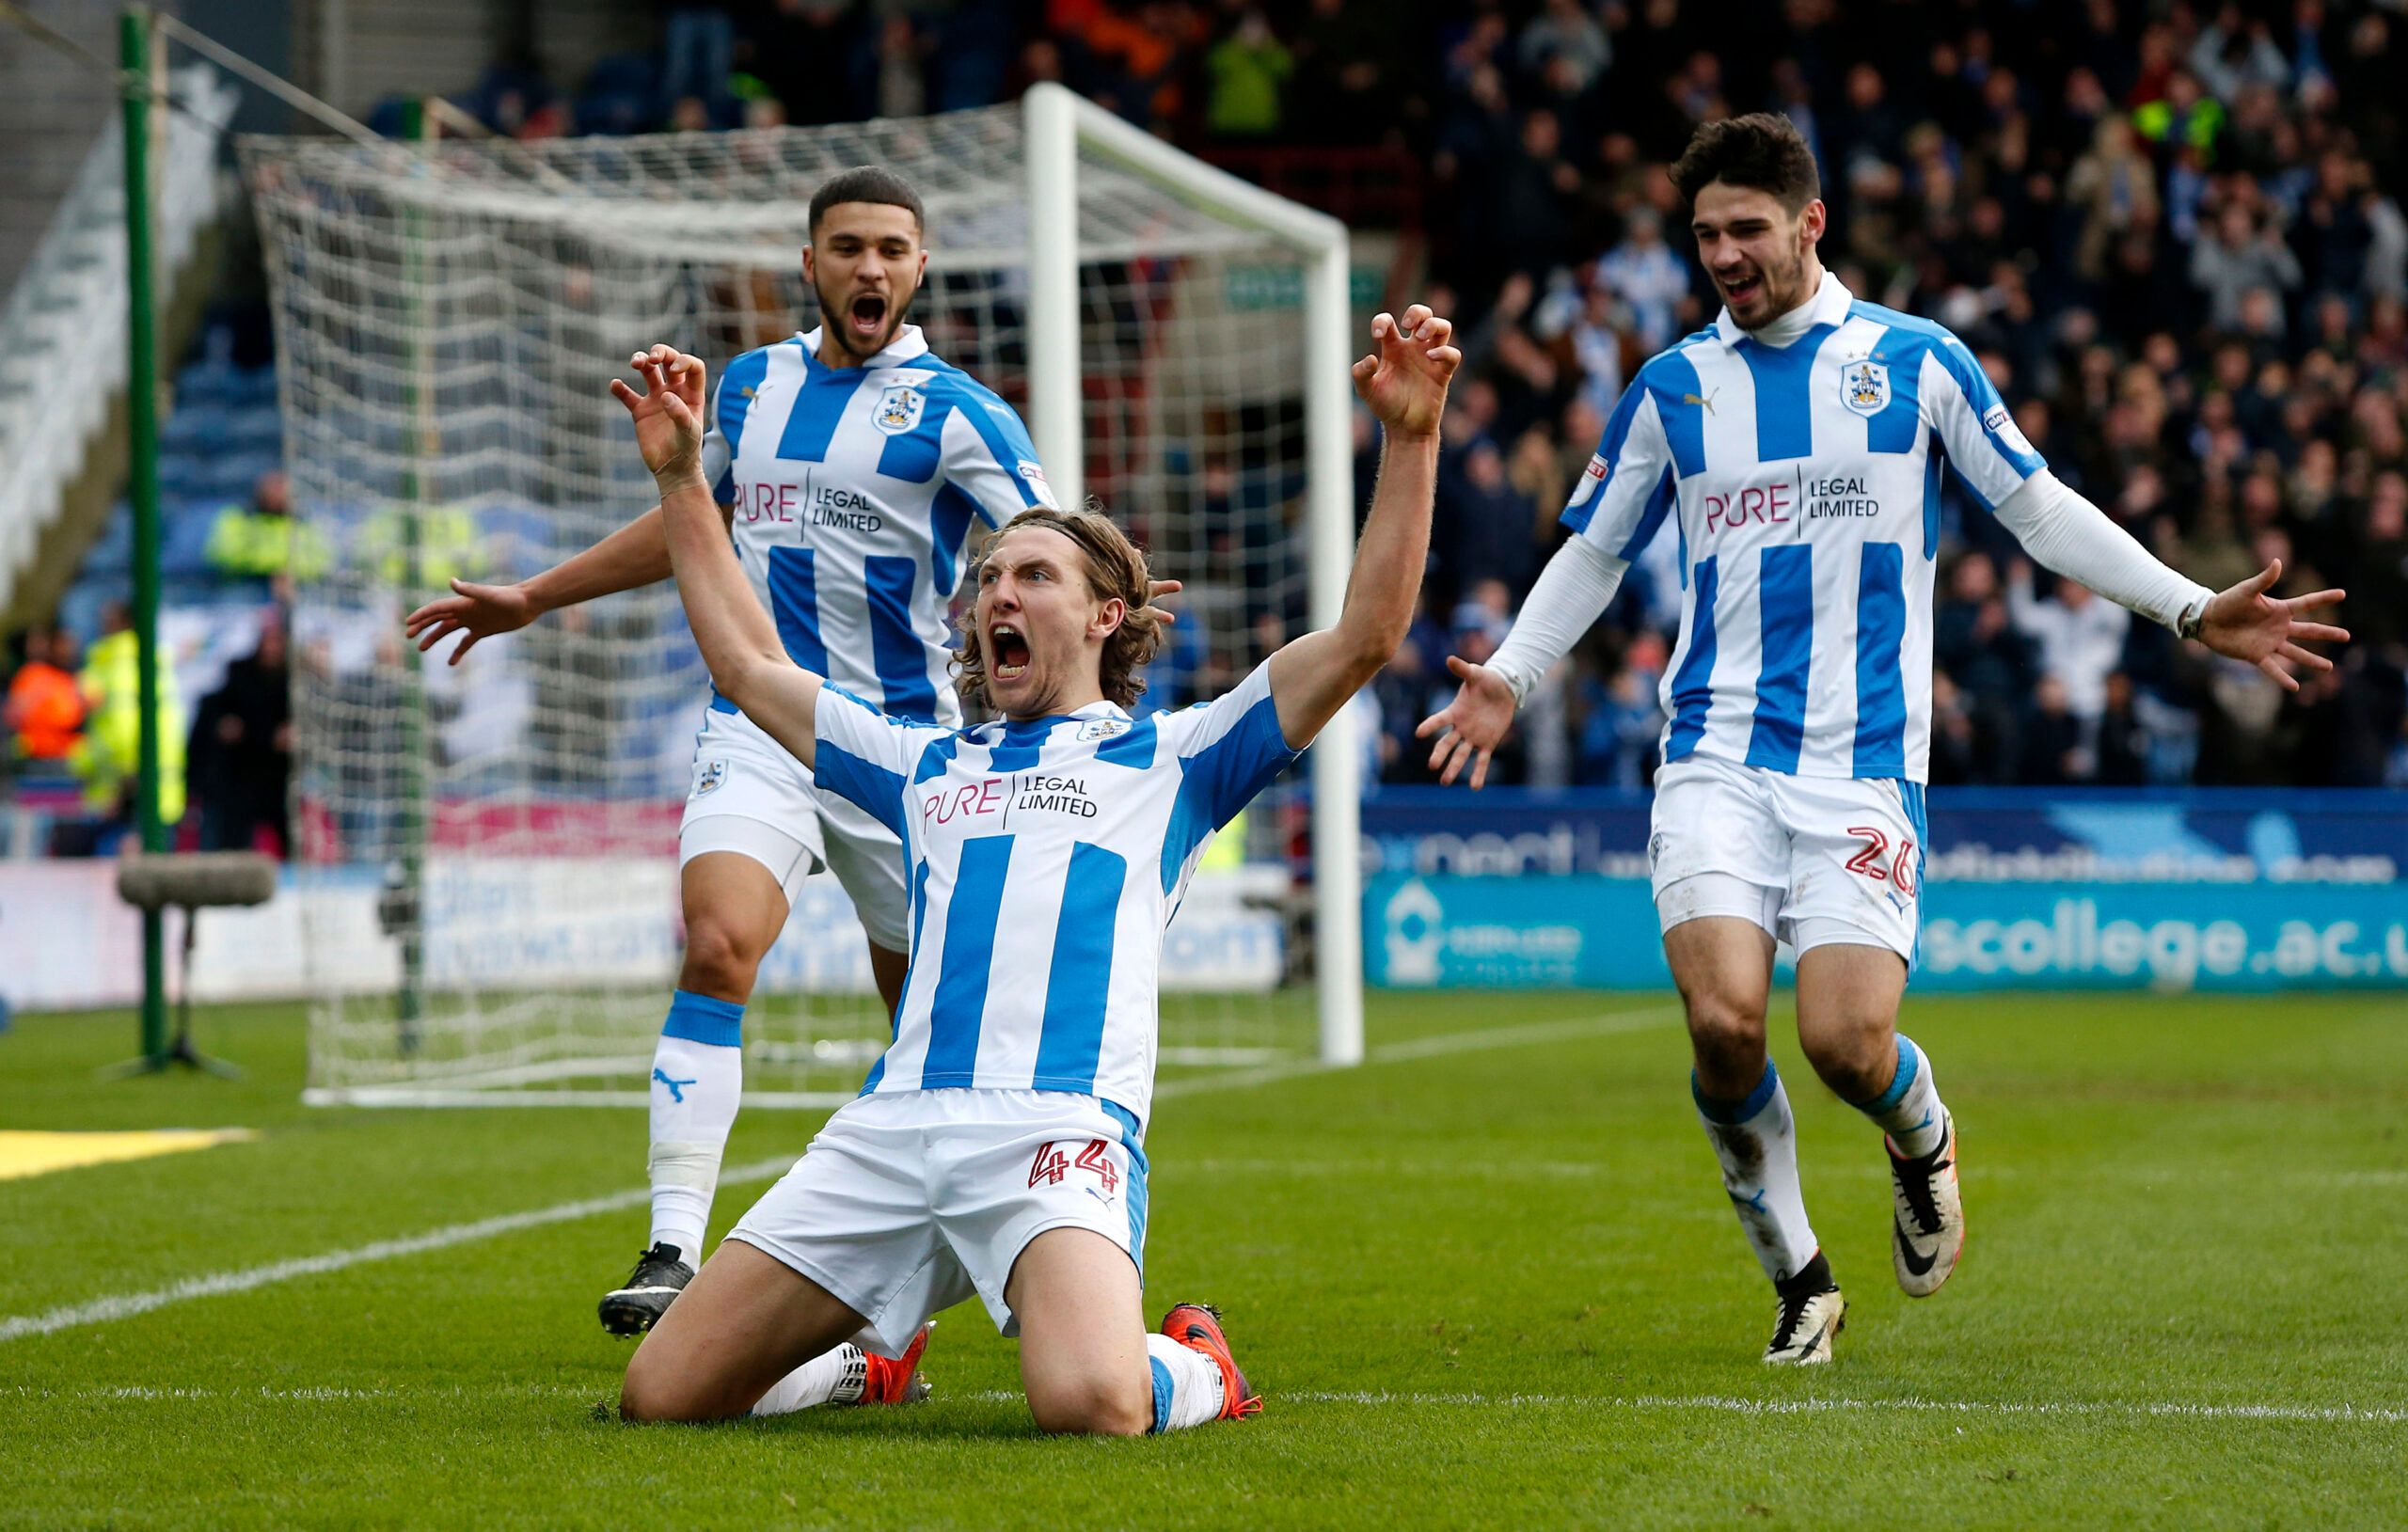 Britain Soccer Football - Huddersfield Town v Leeds United - Sky Bet Championship - The John Smith's Stadium - 5/2/17 Michael Hefele celebrates scoring the second goal for Huddersfield Town Mandatory Credit: Action Images / Ed Sykes Livepic EDITORIAL USE ONLY. No use with unauthorized audio, video, data, fixture lists, club/league logos or 